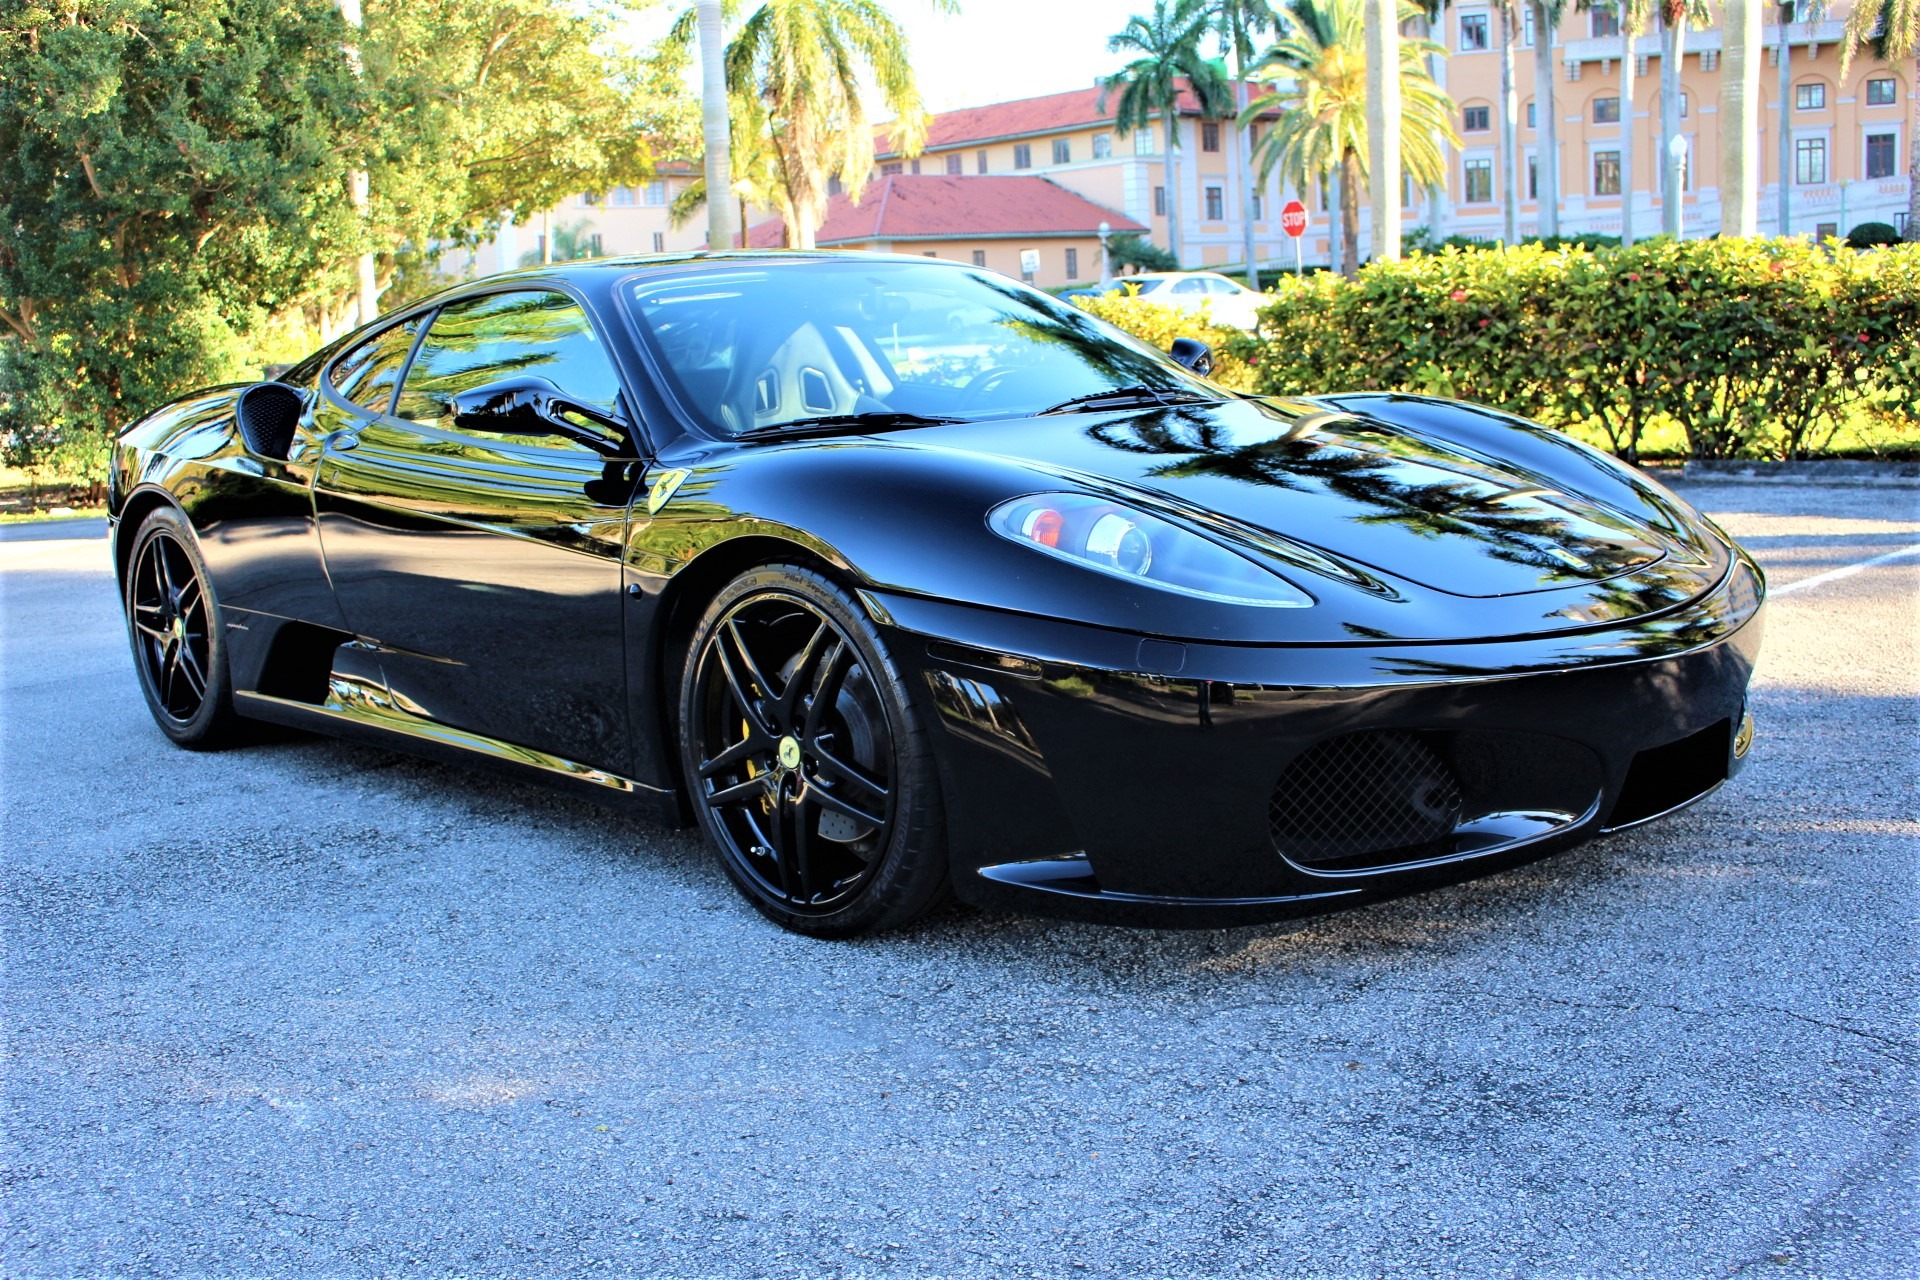 Used 2005 Ferrari F430 for sale Sold at The Gables Sports Cars in Miami FL 33146 4